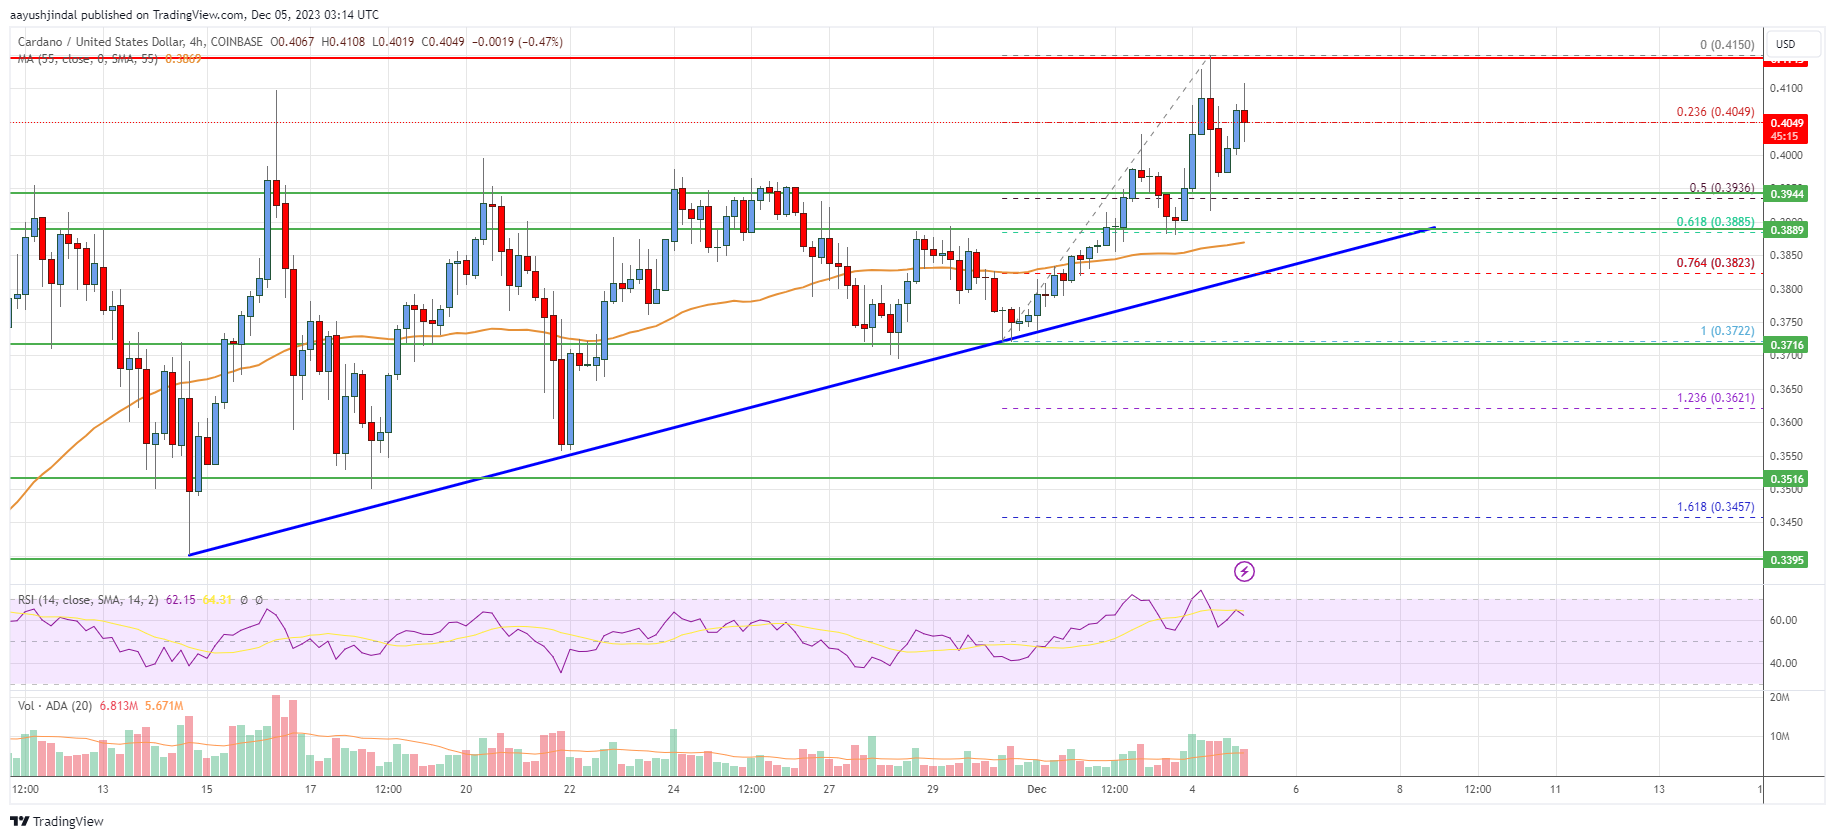 Cardano (ADA) Price Analysis: Signs Suggest Rally To $0.50